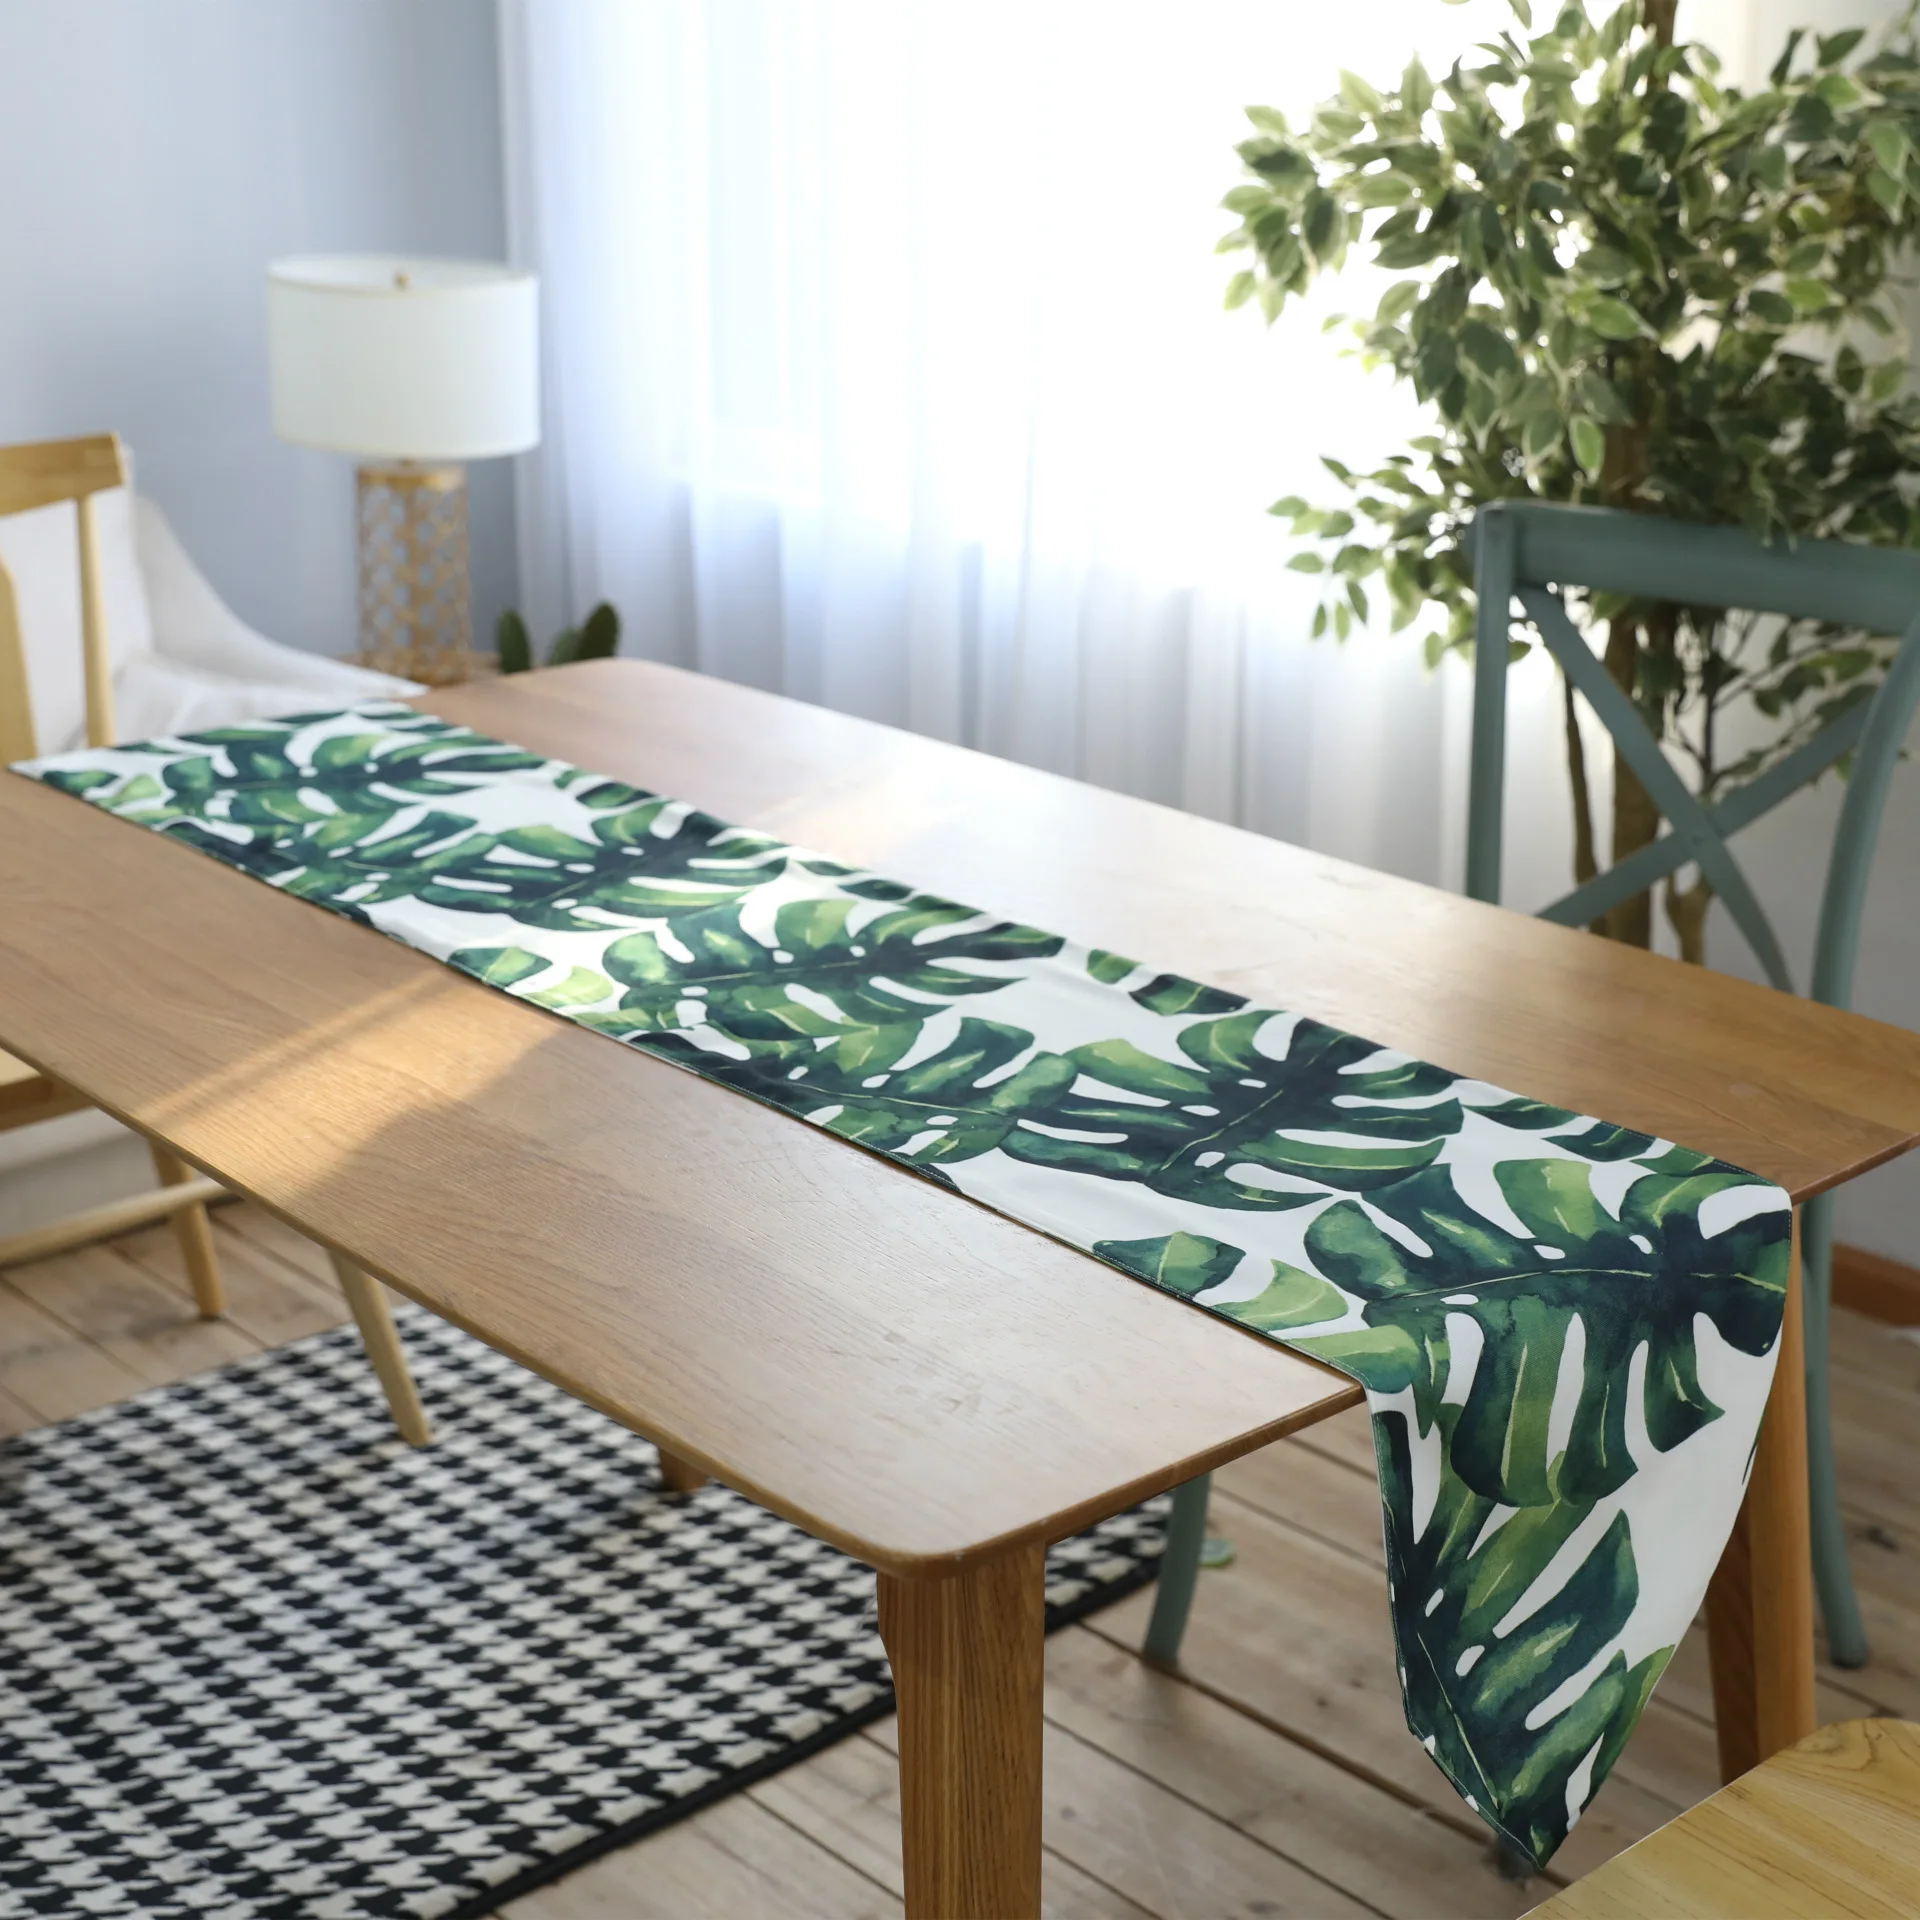 

Modern Table Runner camino de mesa Table Runners for Wedding Party Palm Leaf chemin de table tafelloper Monstera Leaf Placemat